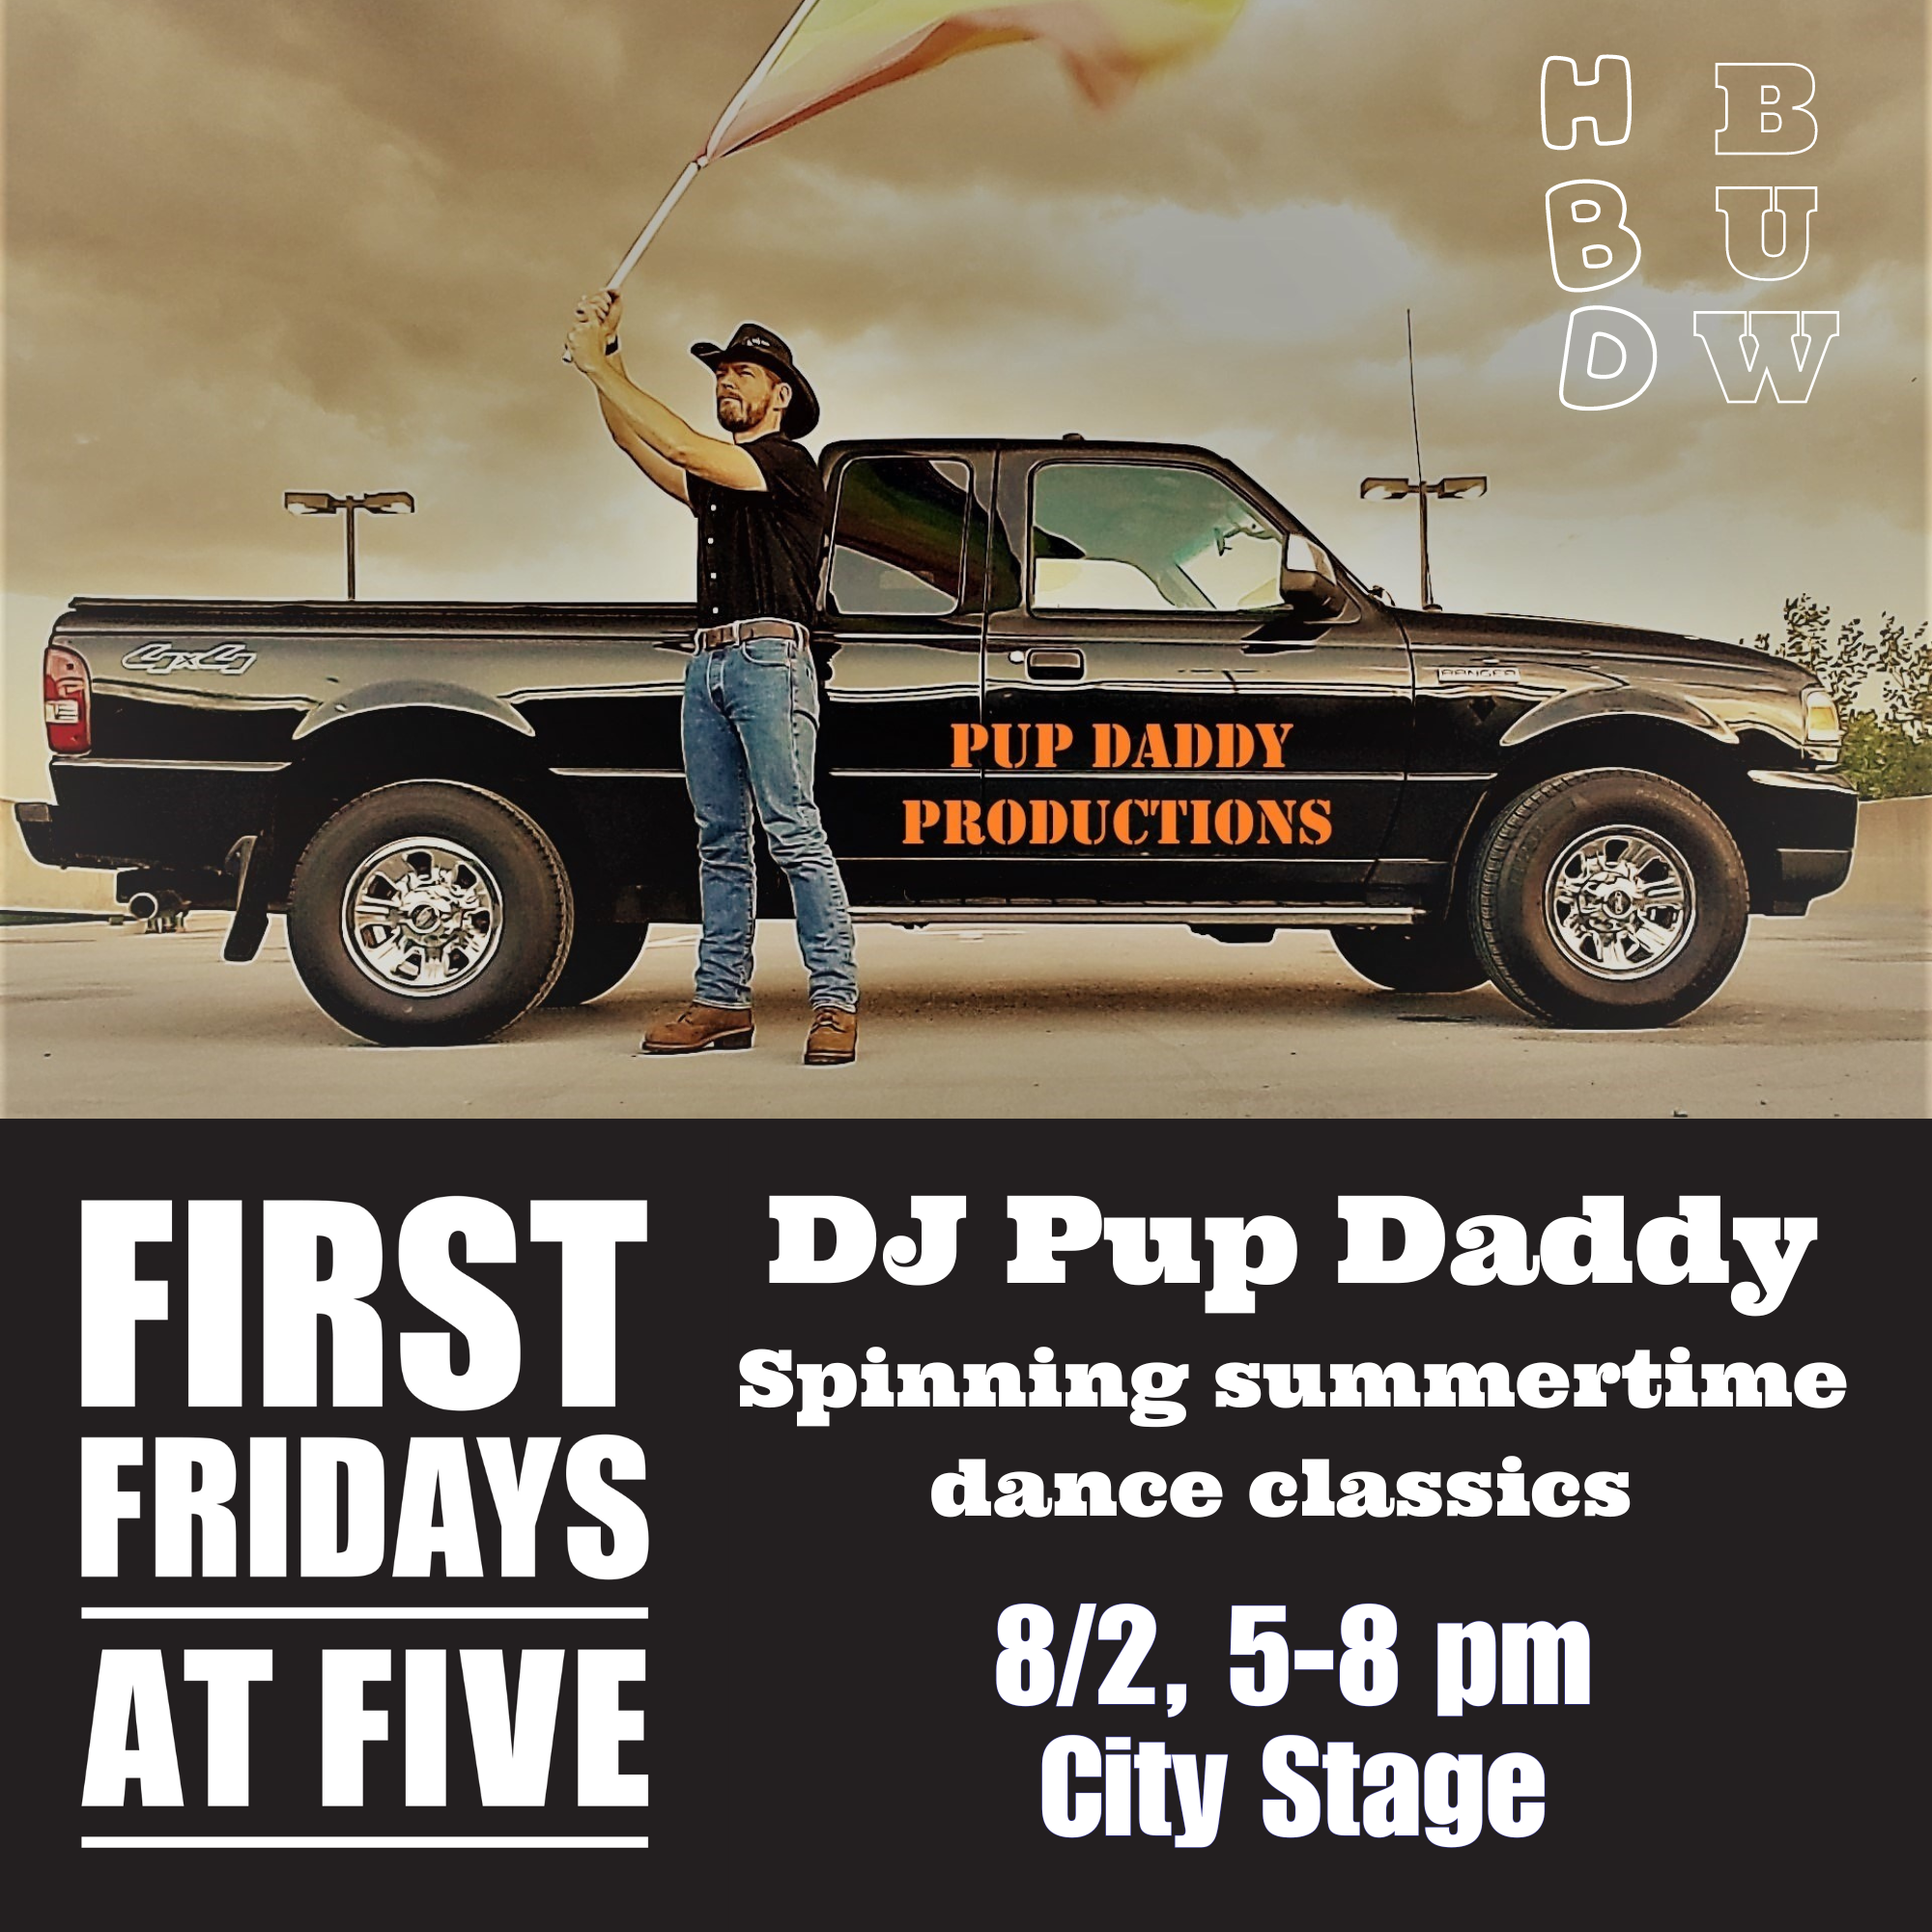 DJ Pup Daddy on the City Stage!